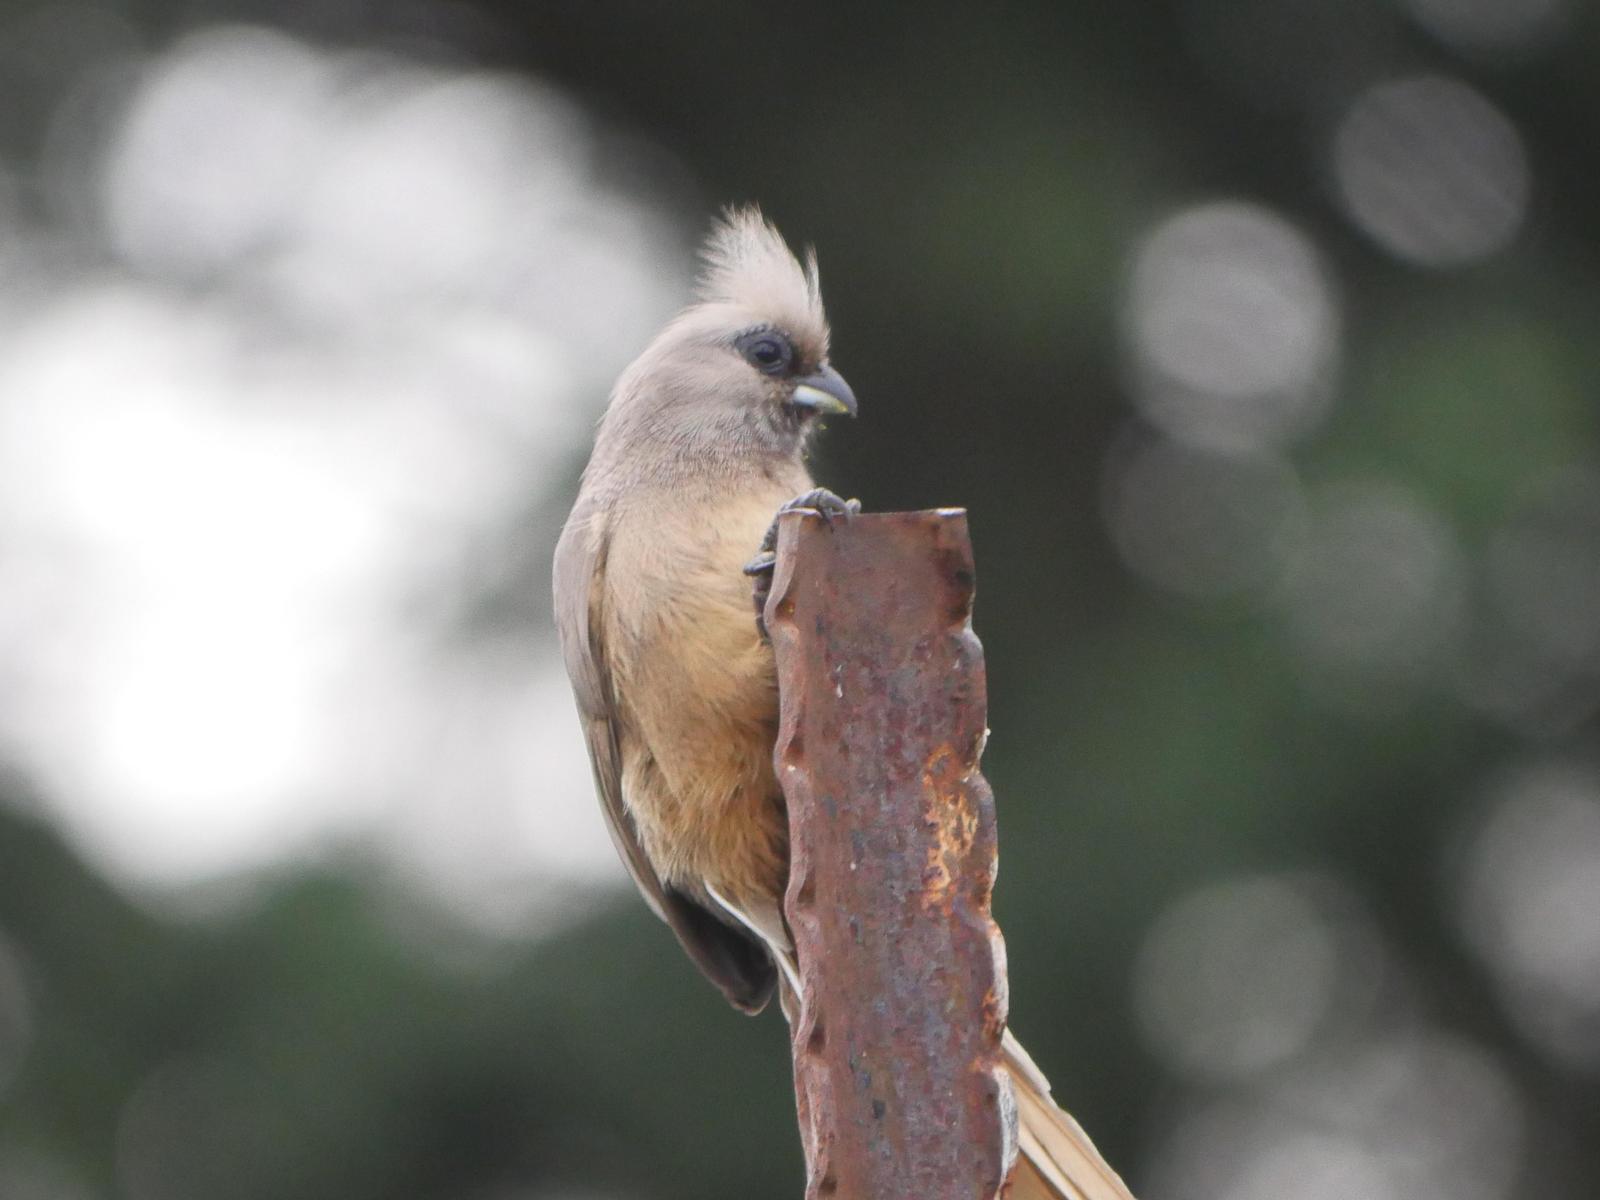 Speckled Mousebird Photo by Peter Lowe